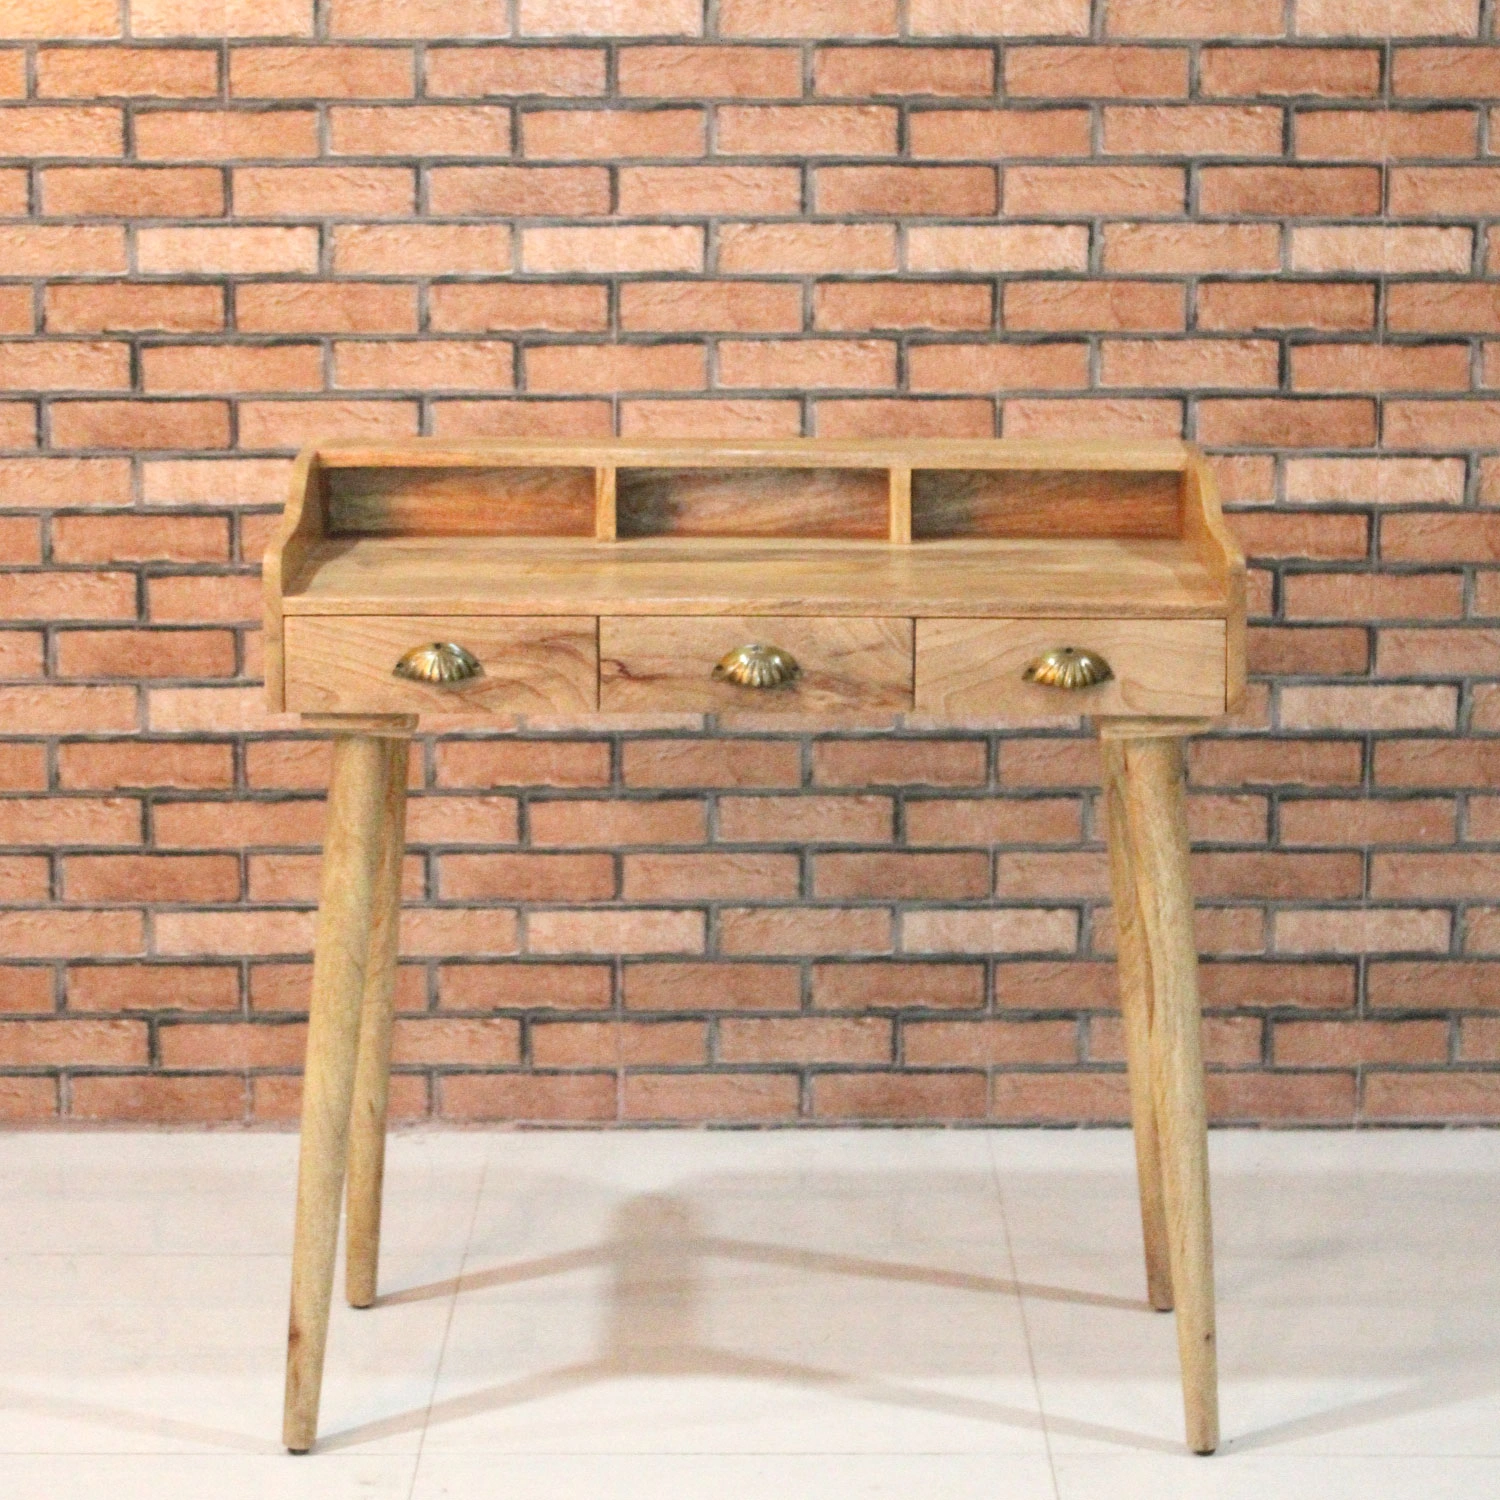 Acacia Wood Workspace Desk with 3 Drawers (KD) - popular handicrafts